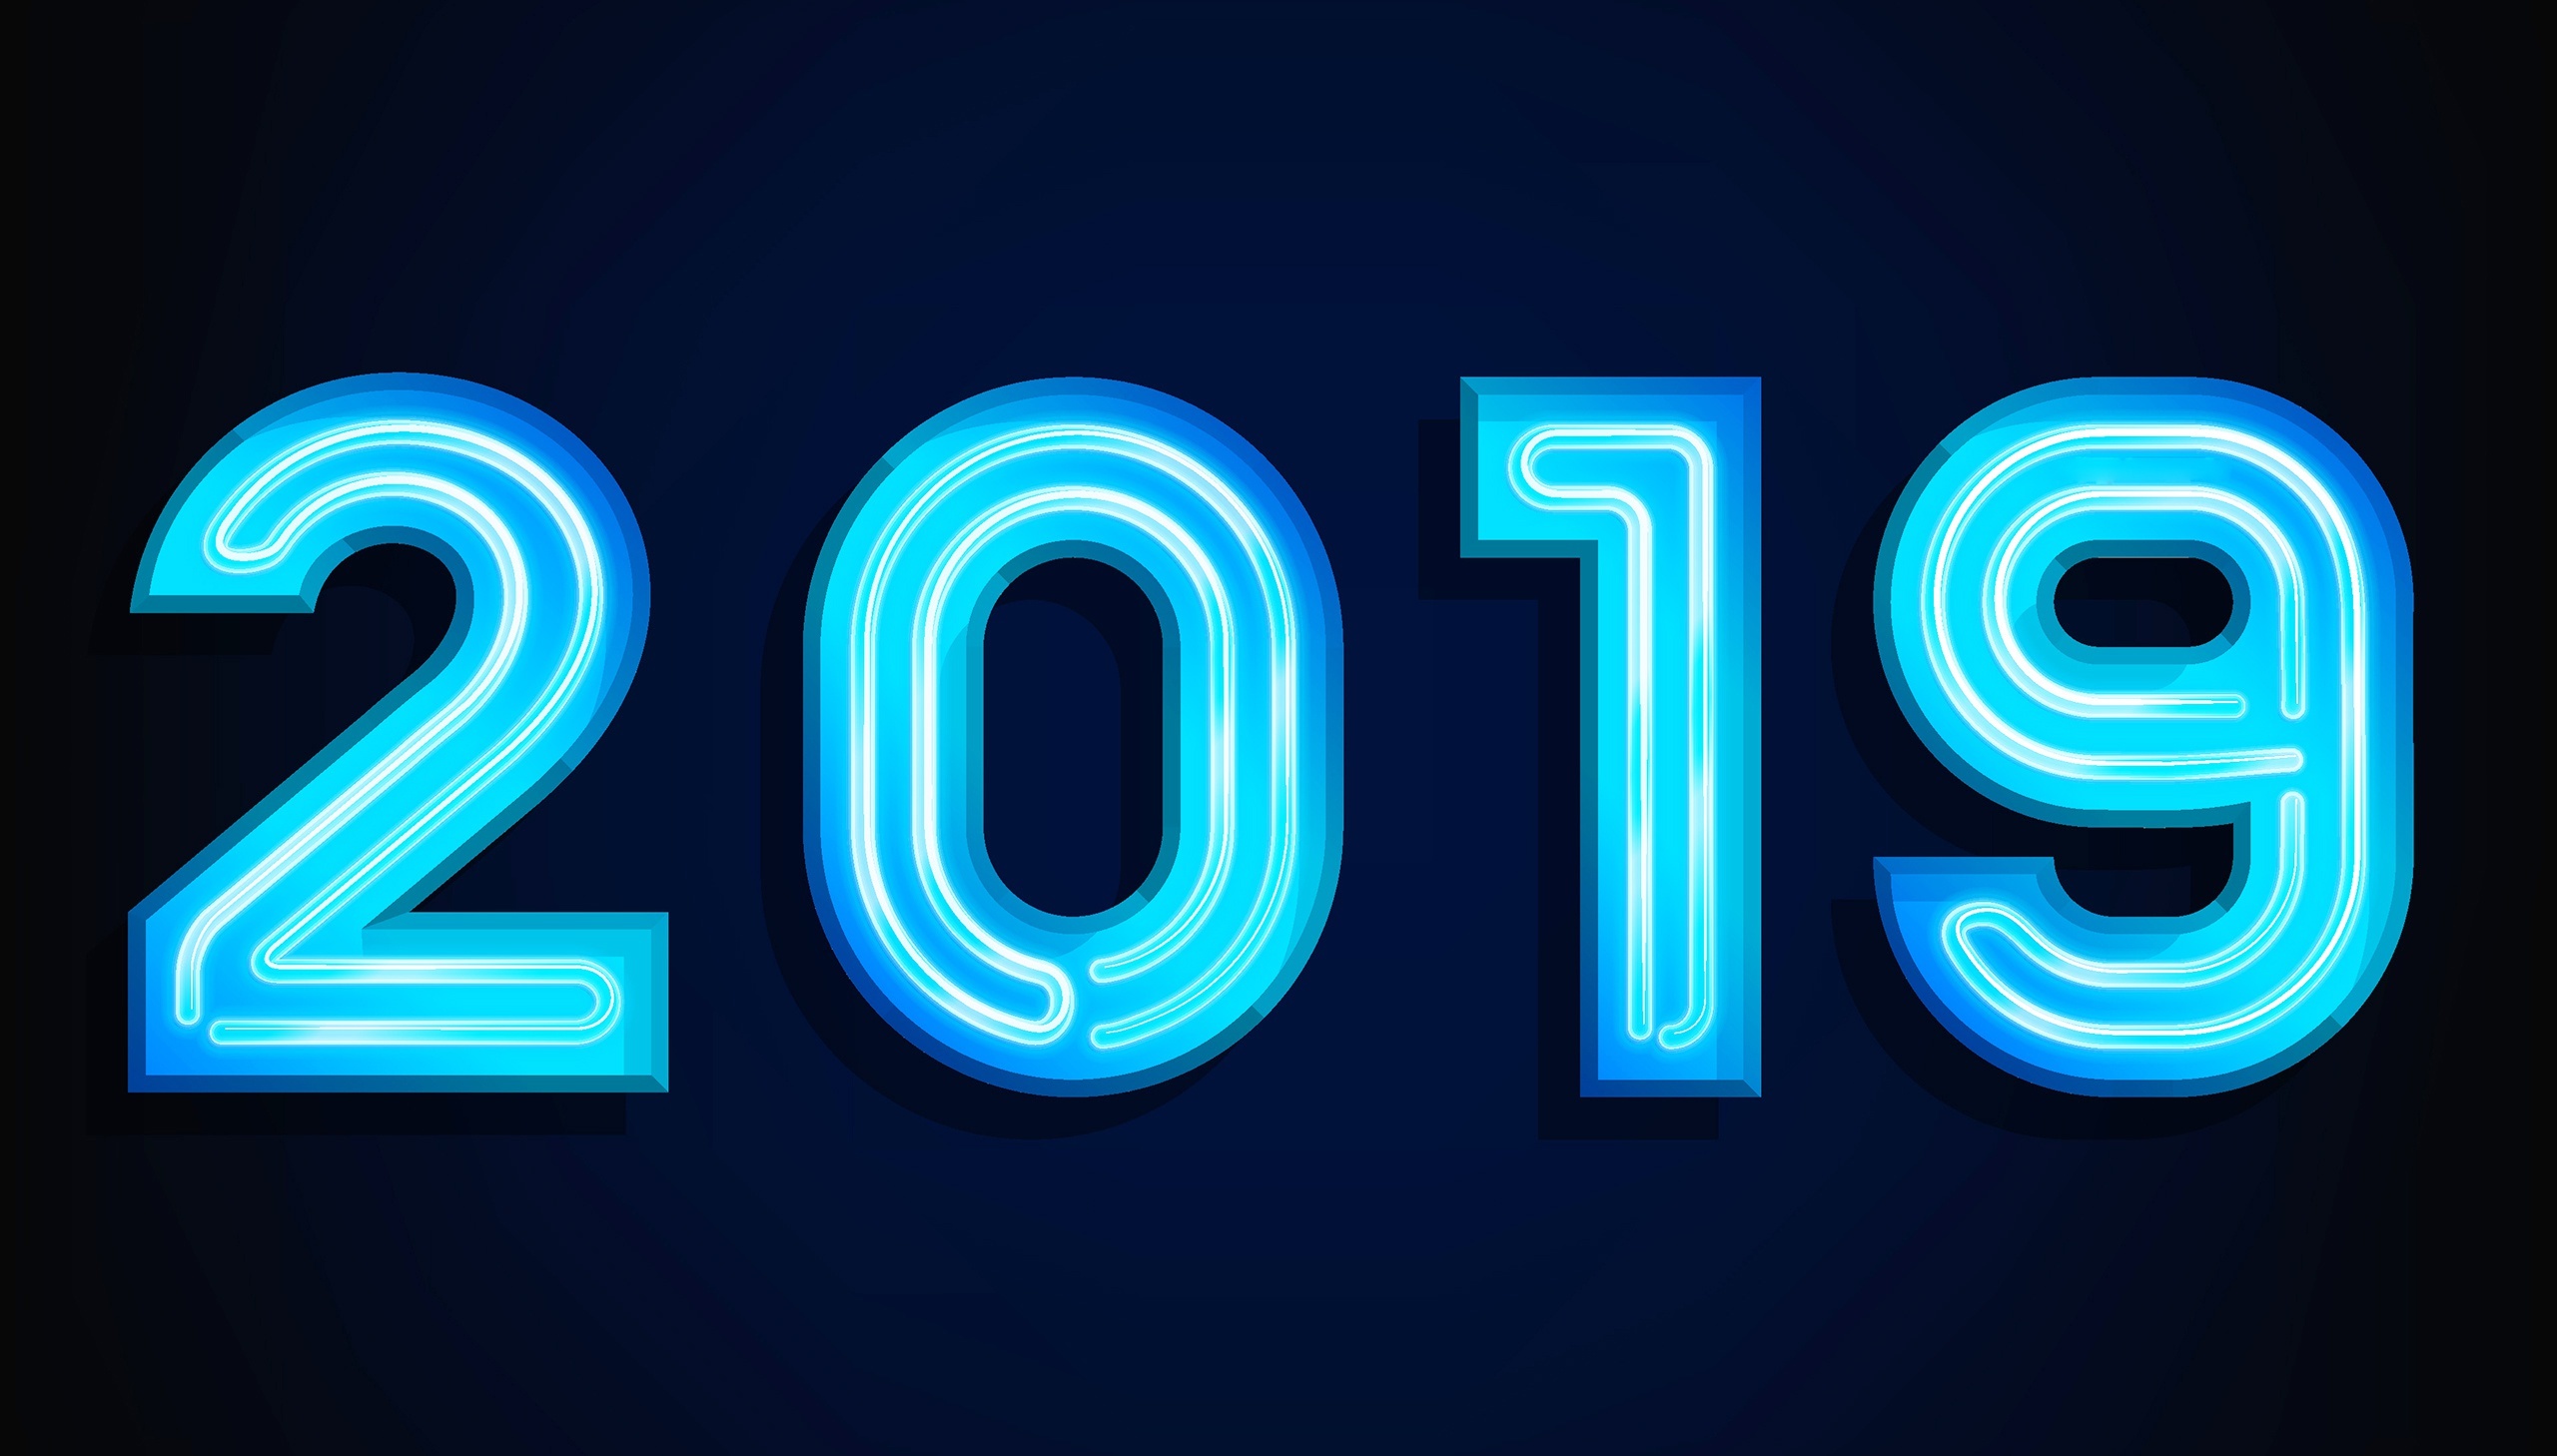 290 New Year 2019 HD Wallpapers and Backgrounds